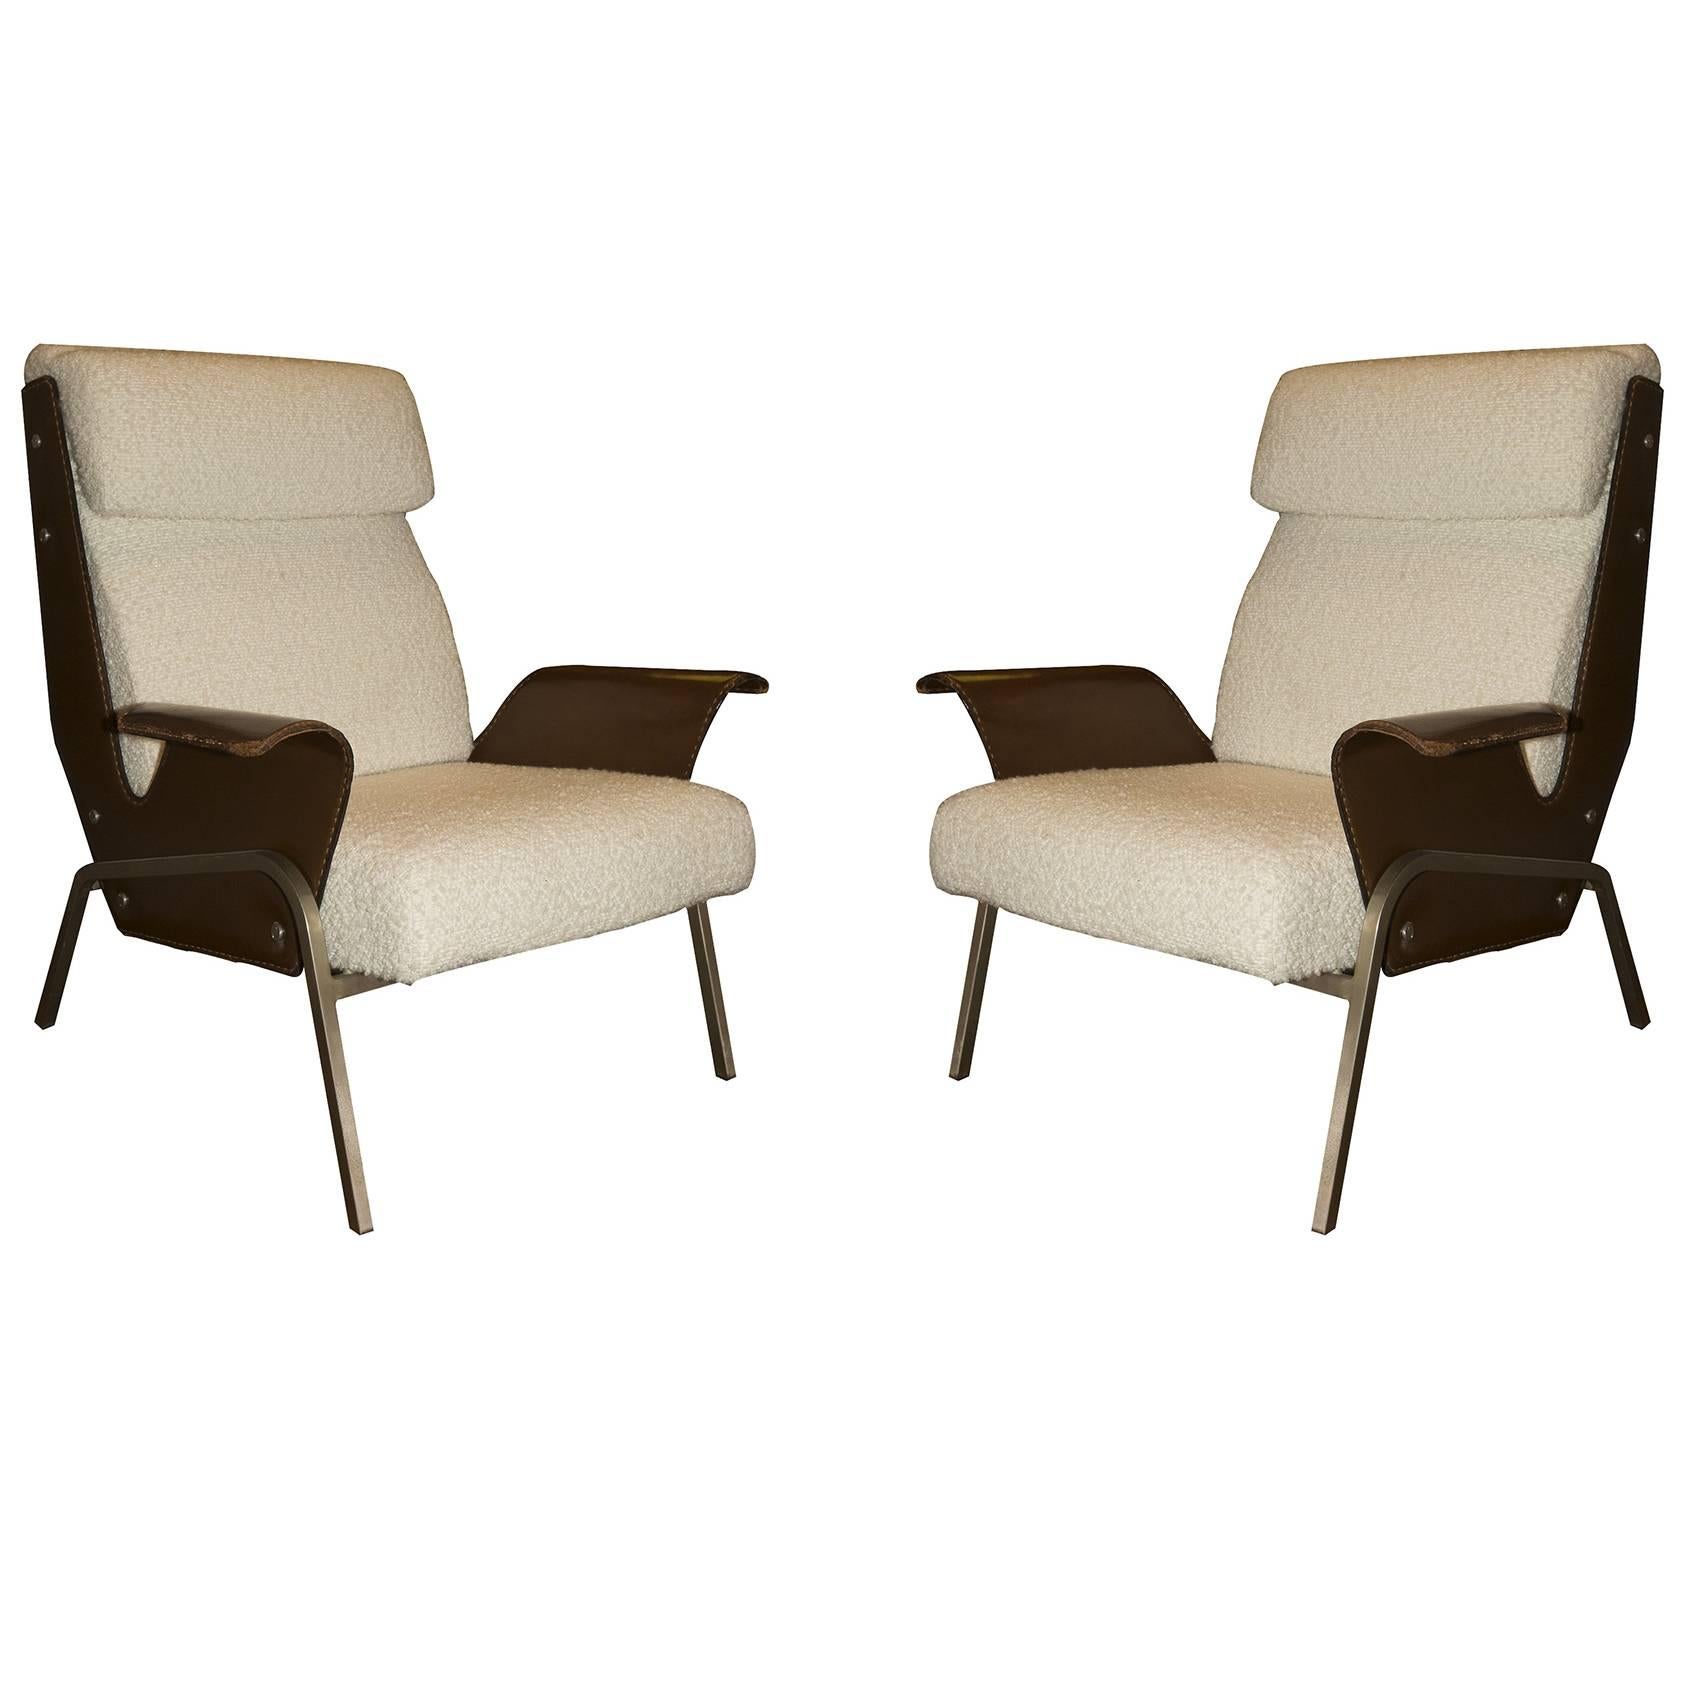 Pair of Alba Lounge Chairs by Gustavo Pulitzer for Arflex, made in Italy, 1959 For Sale